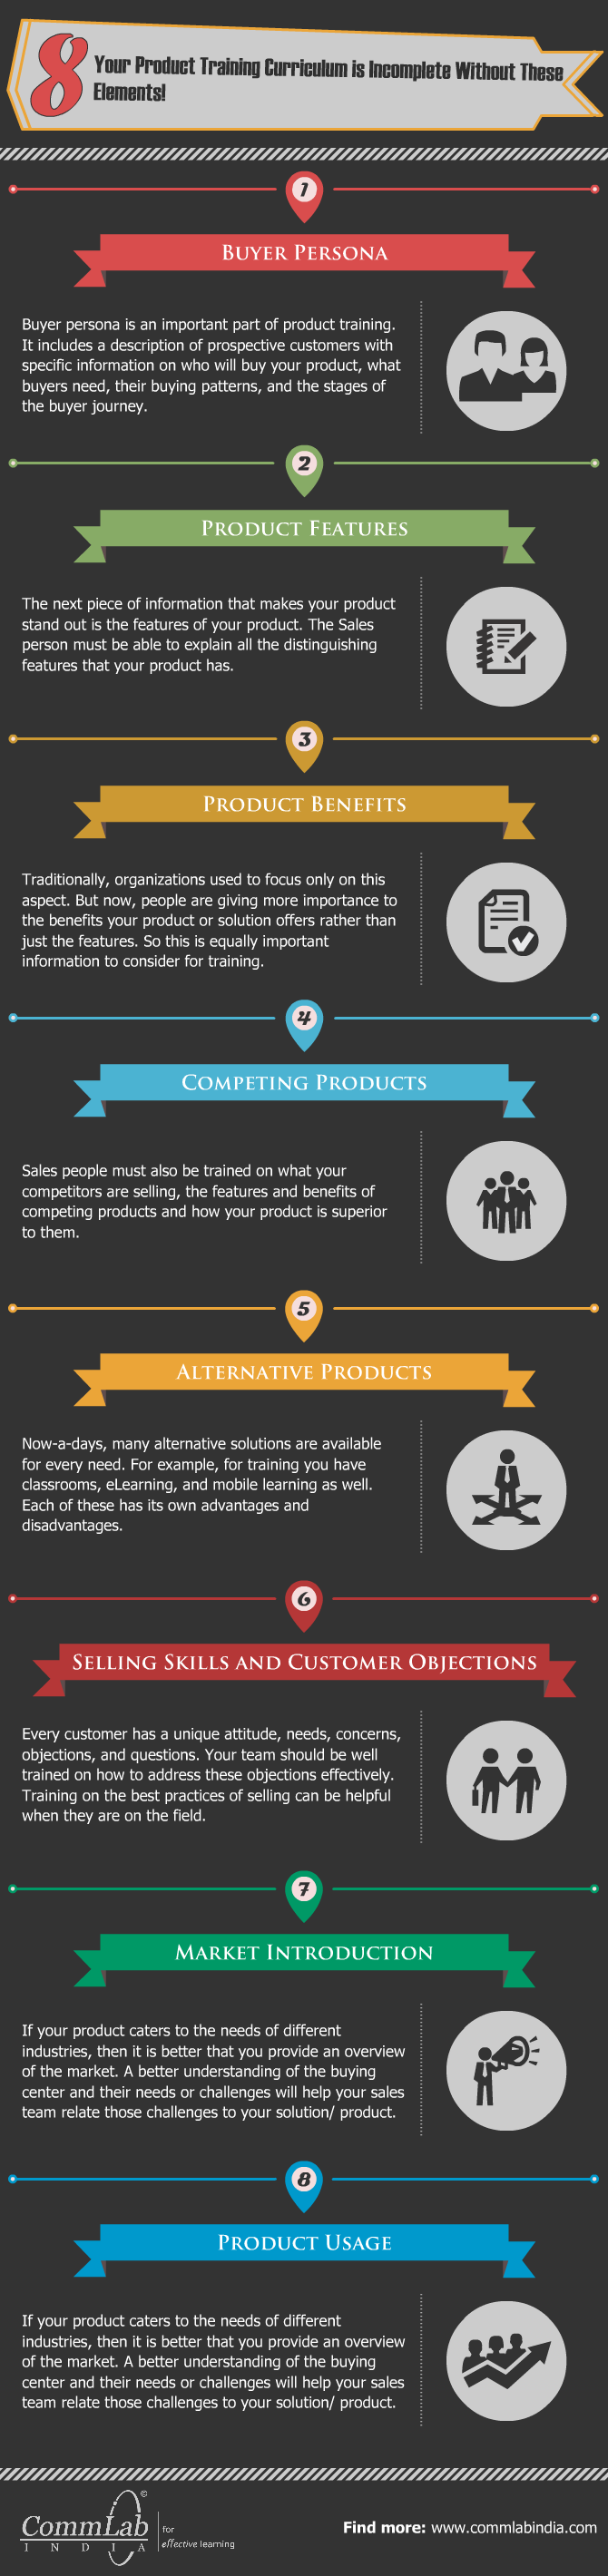 8 Elements Which Should be Included in Your Product Knowledge Training Curriculum [Infographic]